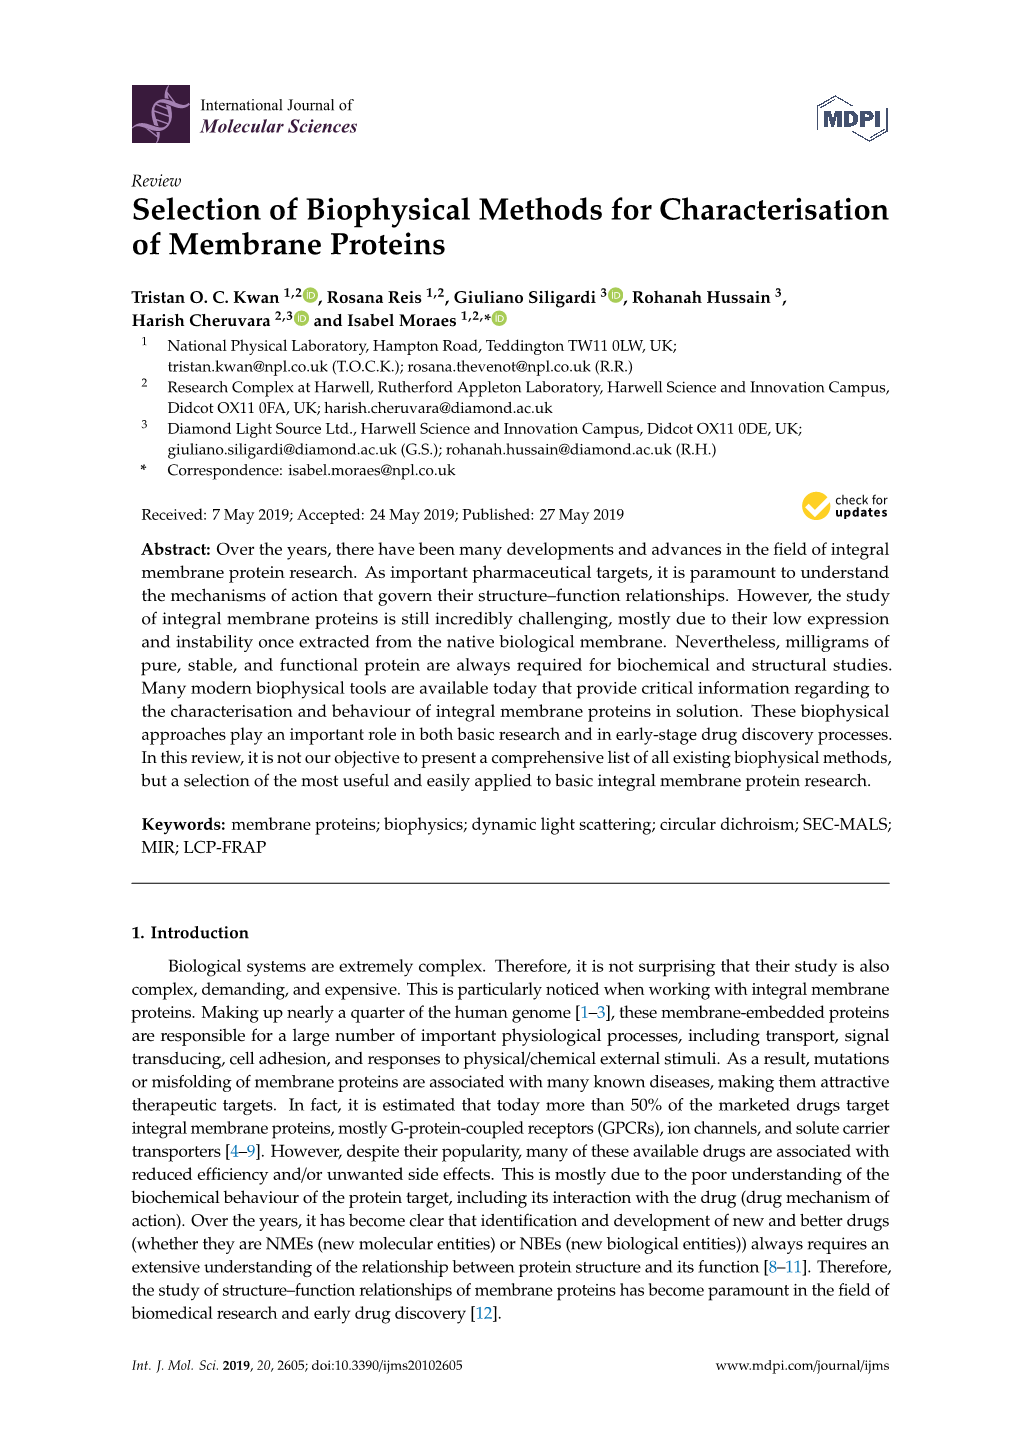 Selection of Biophysical Methods for Characterisation of Membrane Proteins